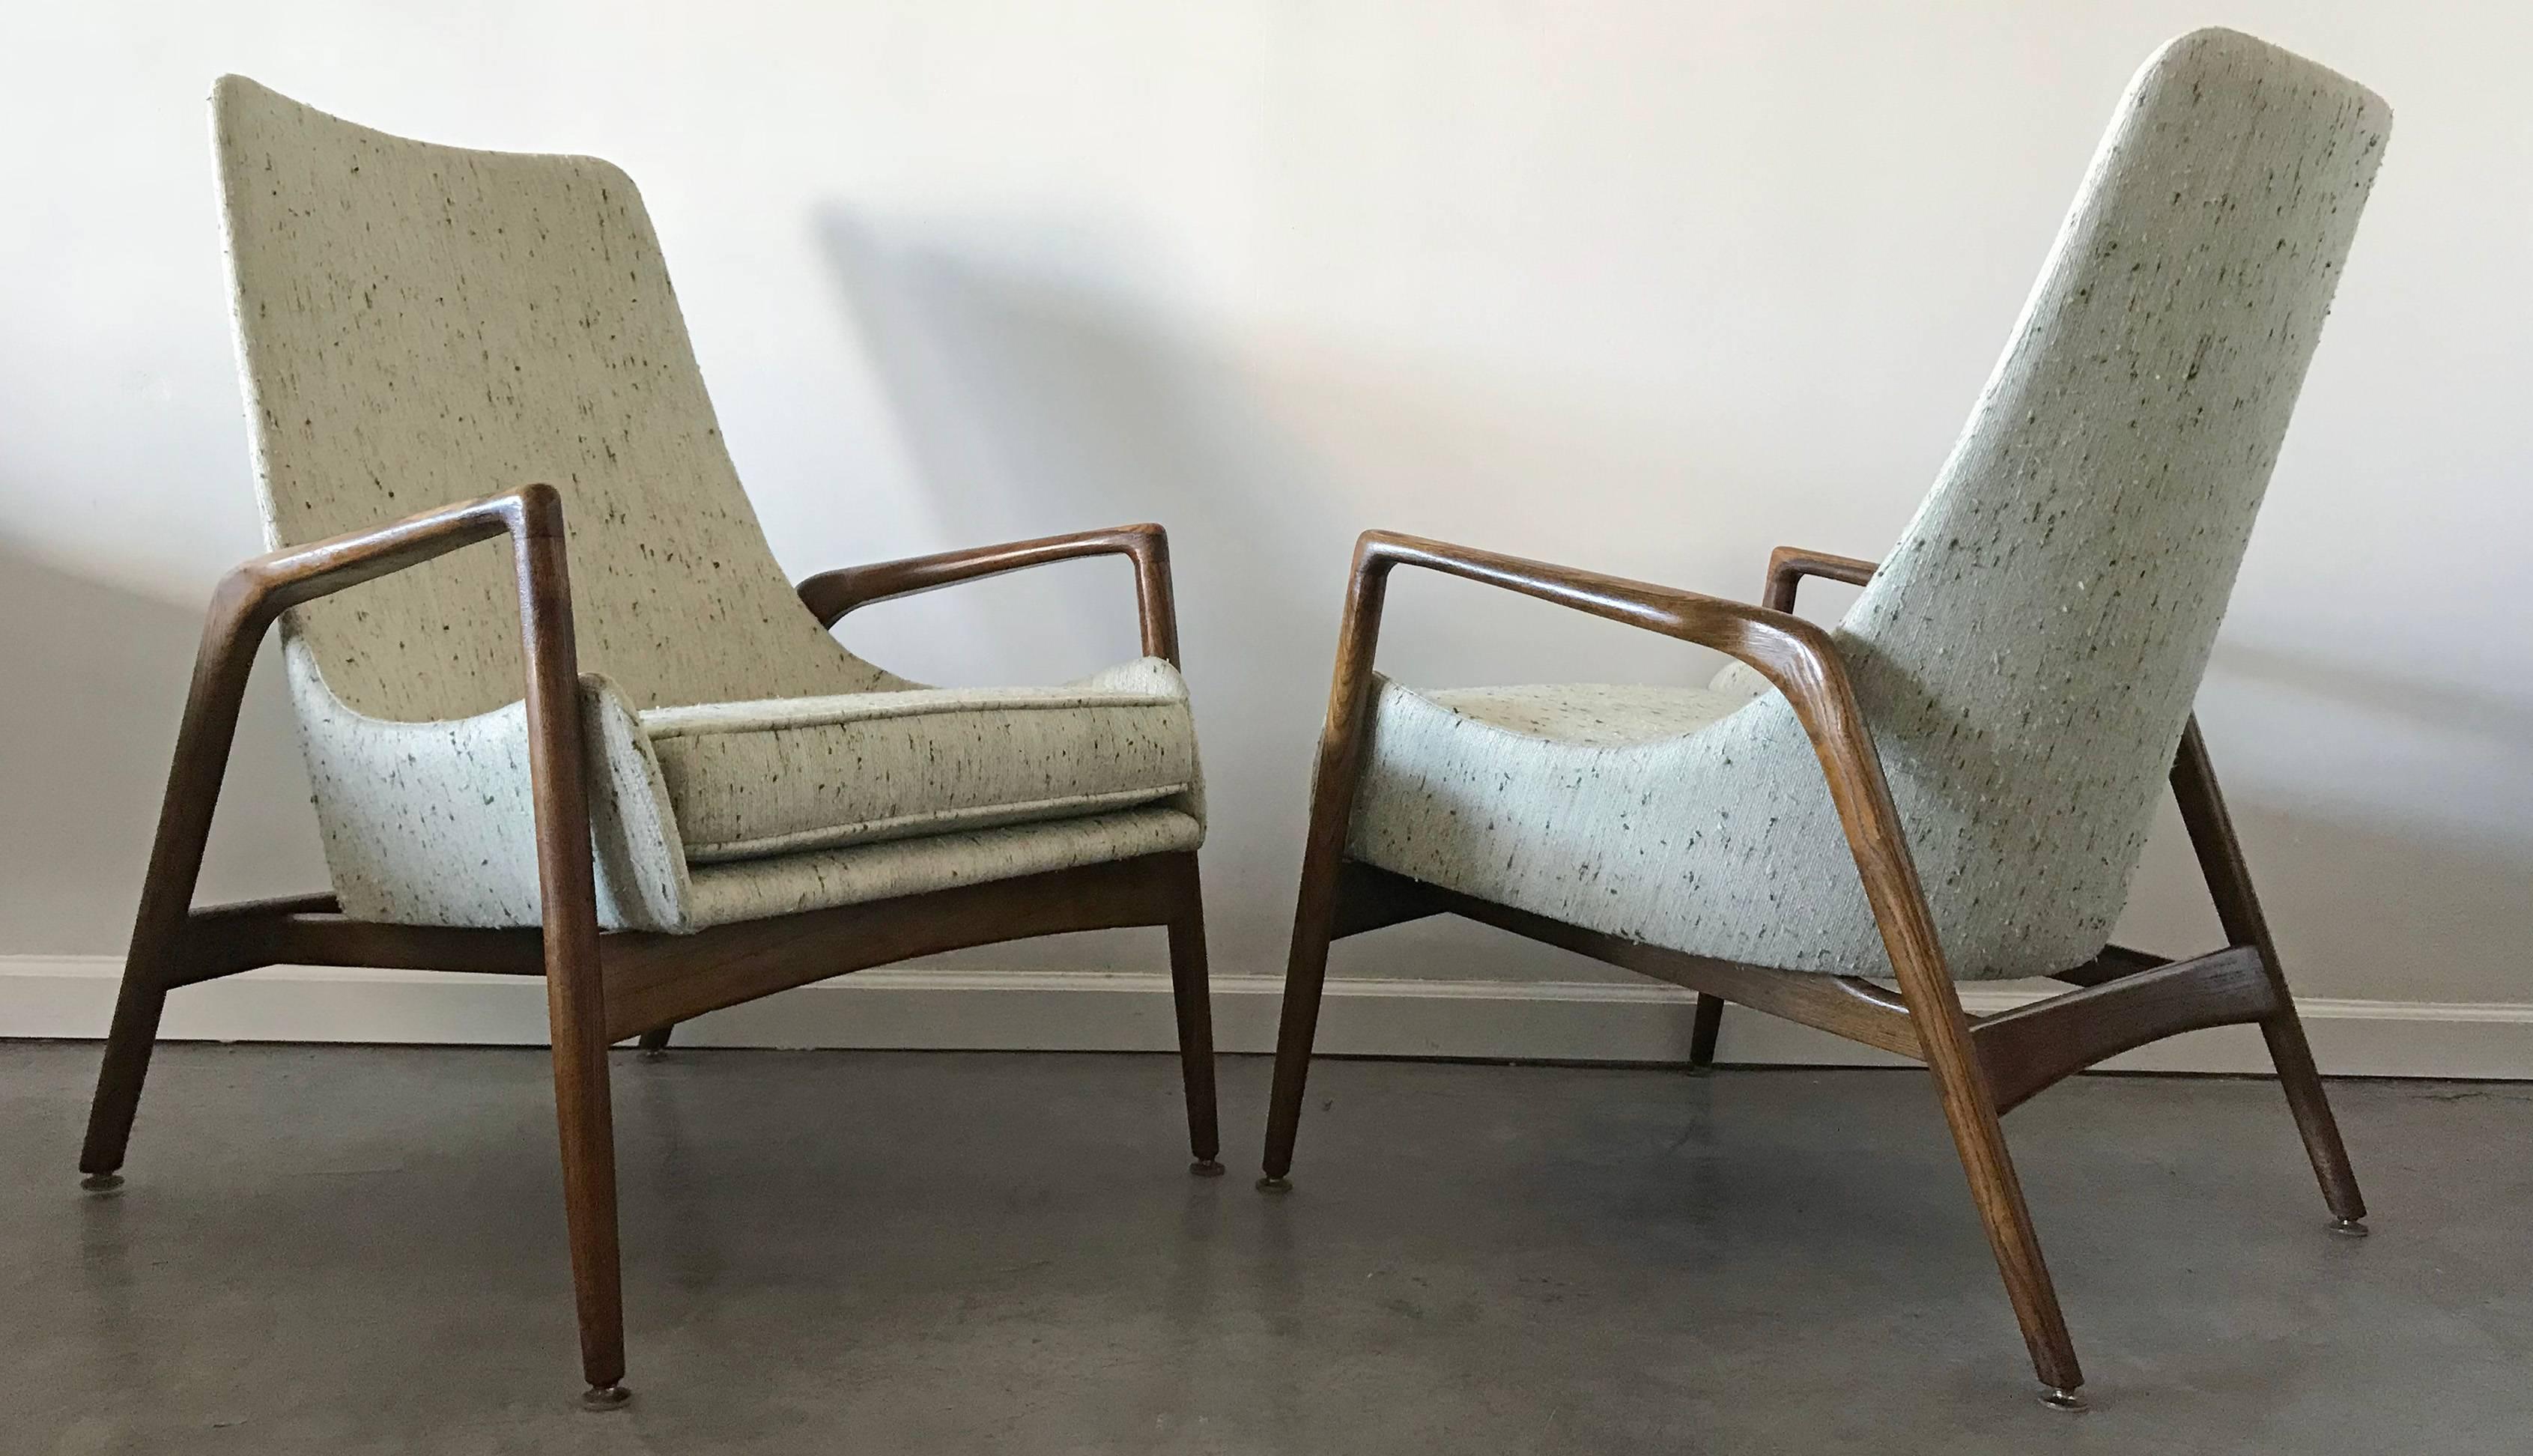 A rare, early pair of Ib Kofod Larsen high back lounge chairs. These early lounge chairs feature clean modern lines and timeless design on their original, unrestored walnut frames, with incredible patina. The chairs have been reupholstered in a